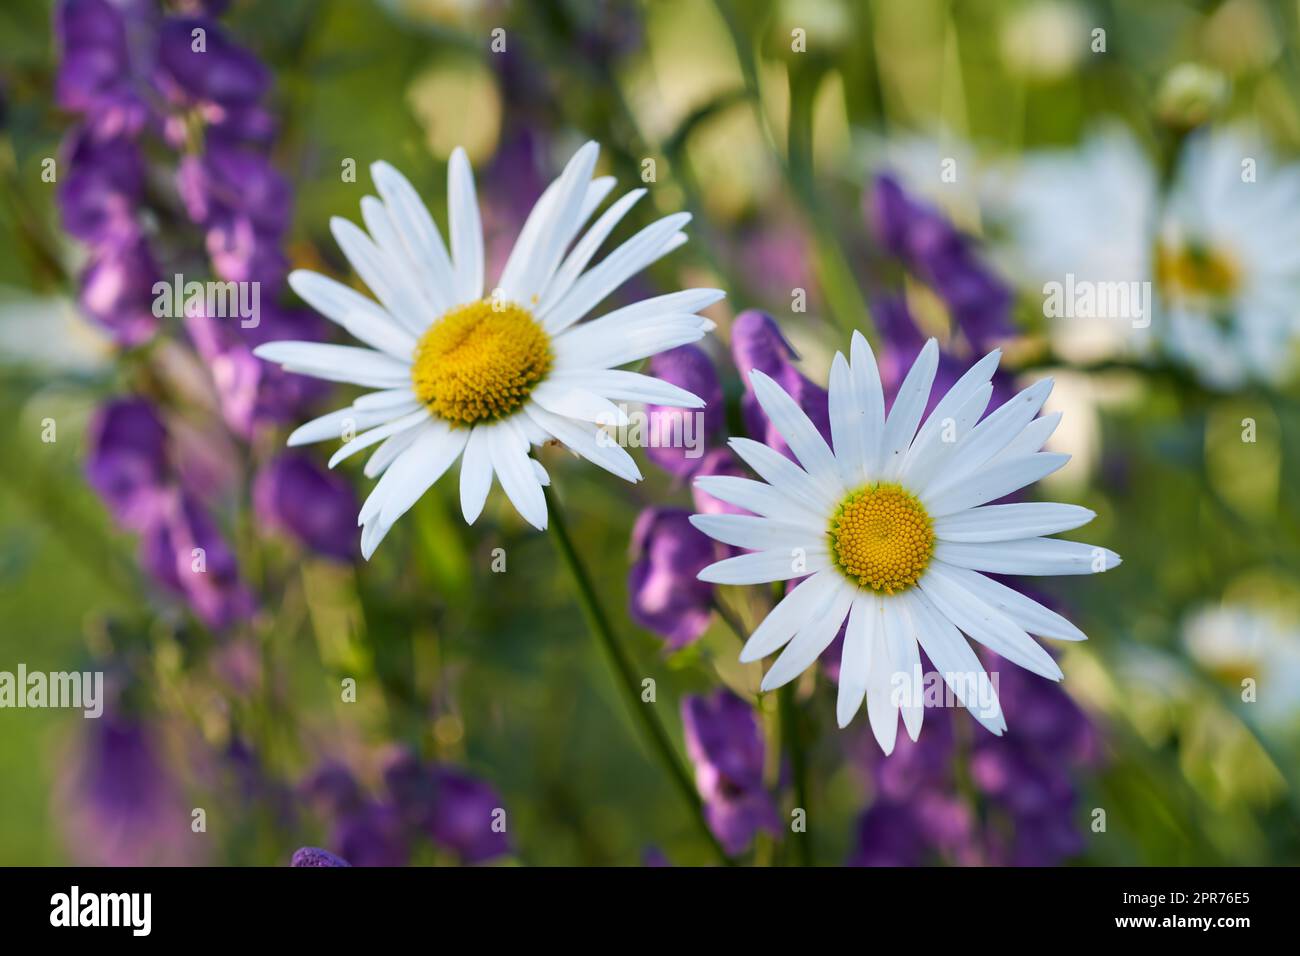 Two white daisiy flowers blooming in a garden. Flowerheads with yellow centers flourishing in a botanical garden or park on a sunny day in spring. Marguerite and other purple plant species in nature Stock Photo